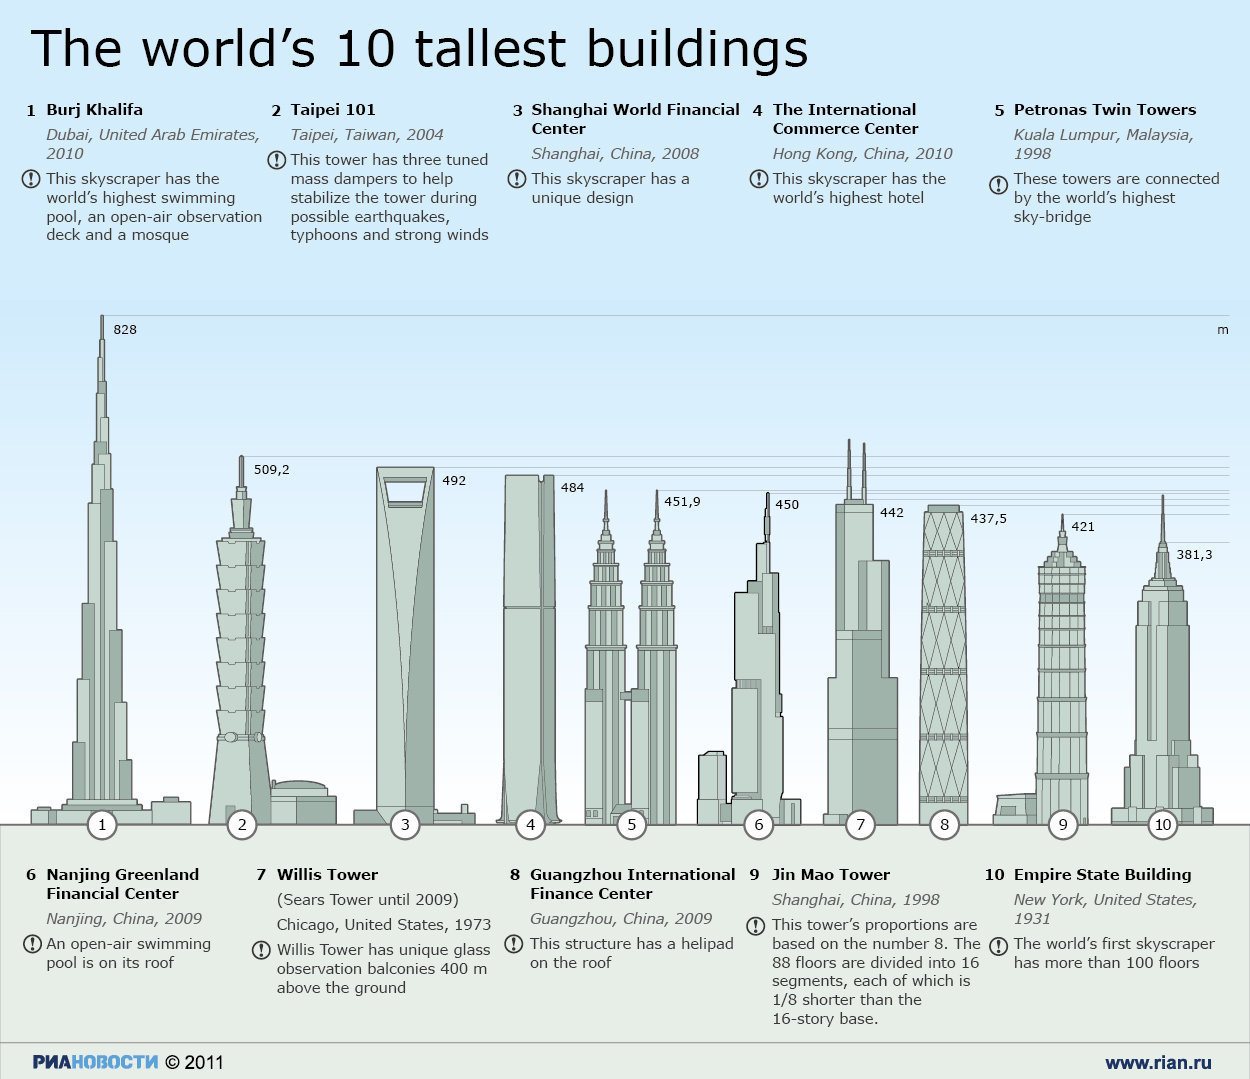 floral tall buildings of the world image